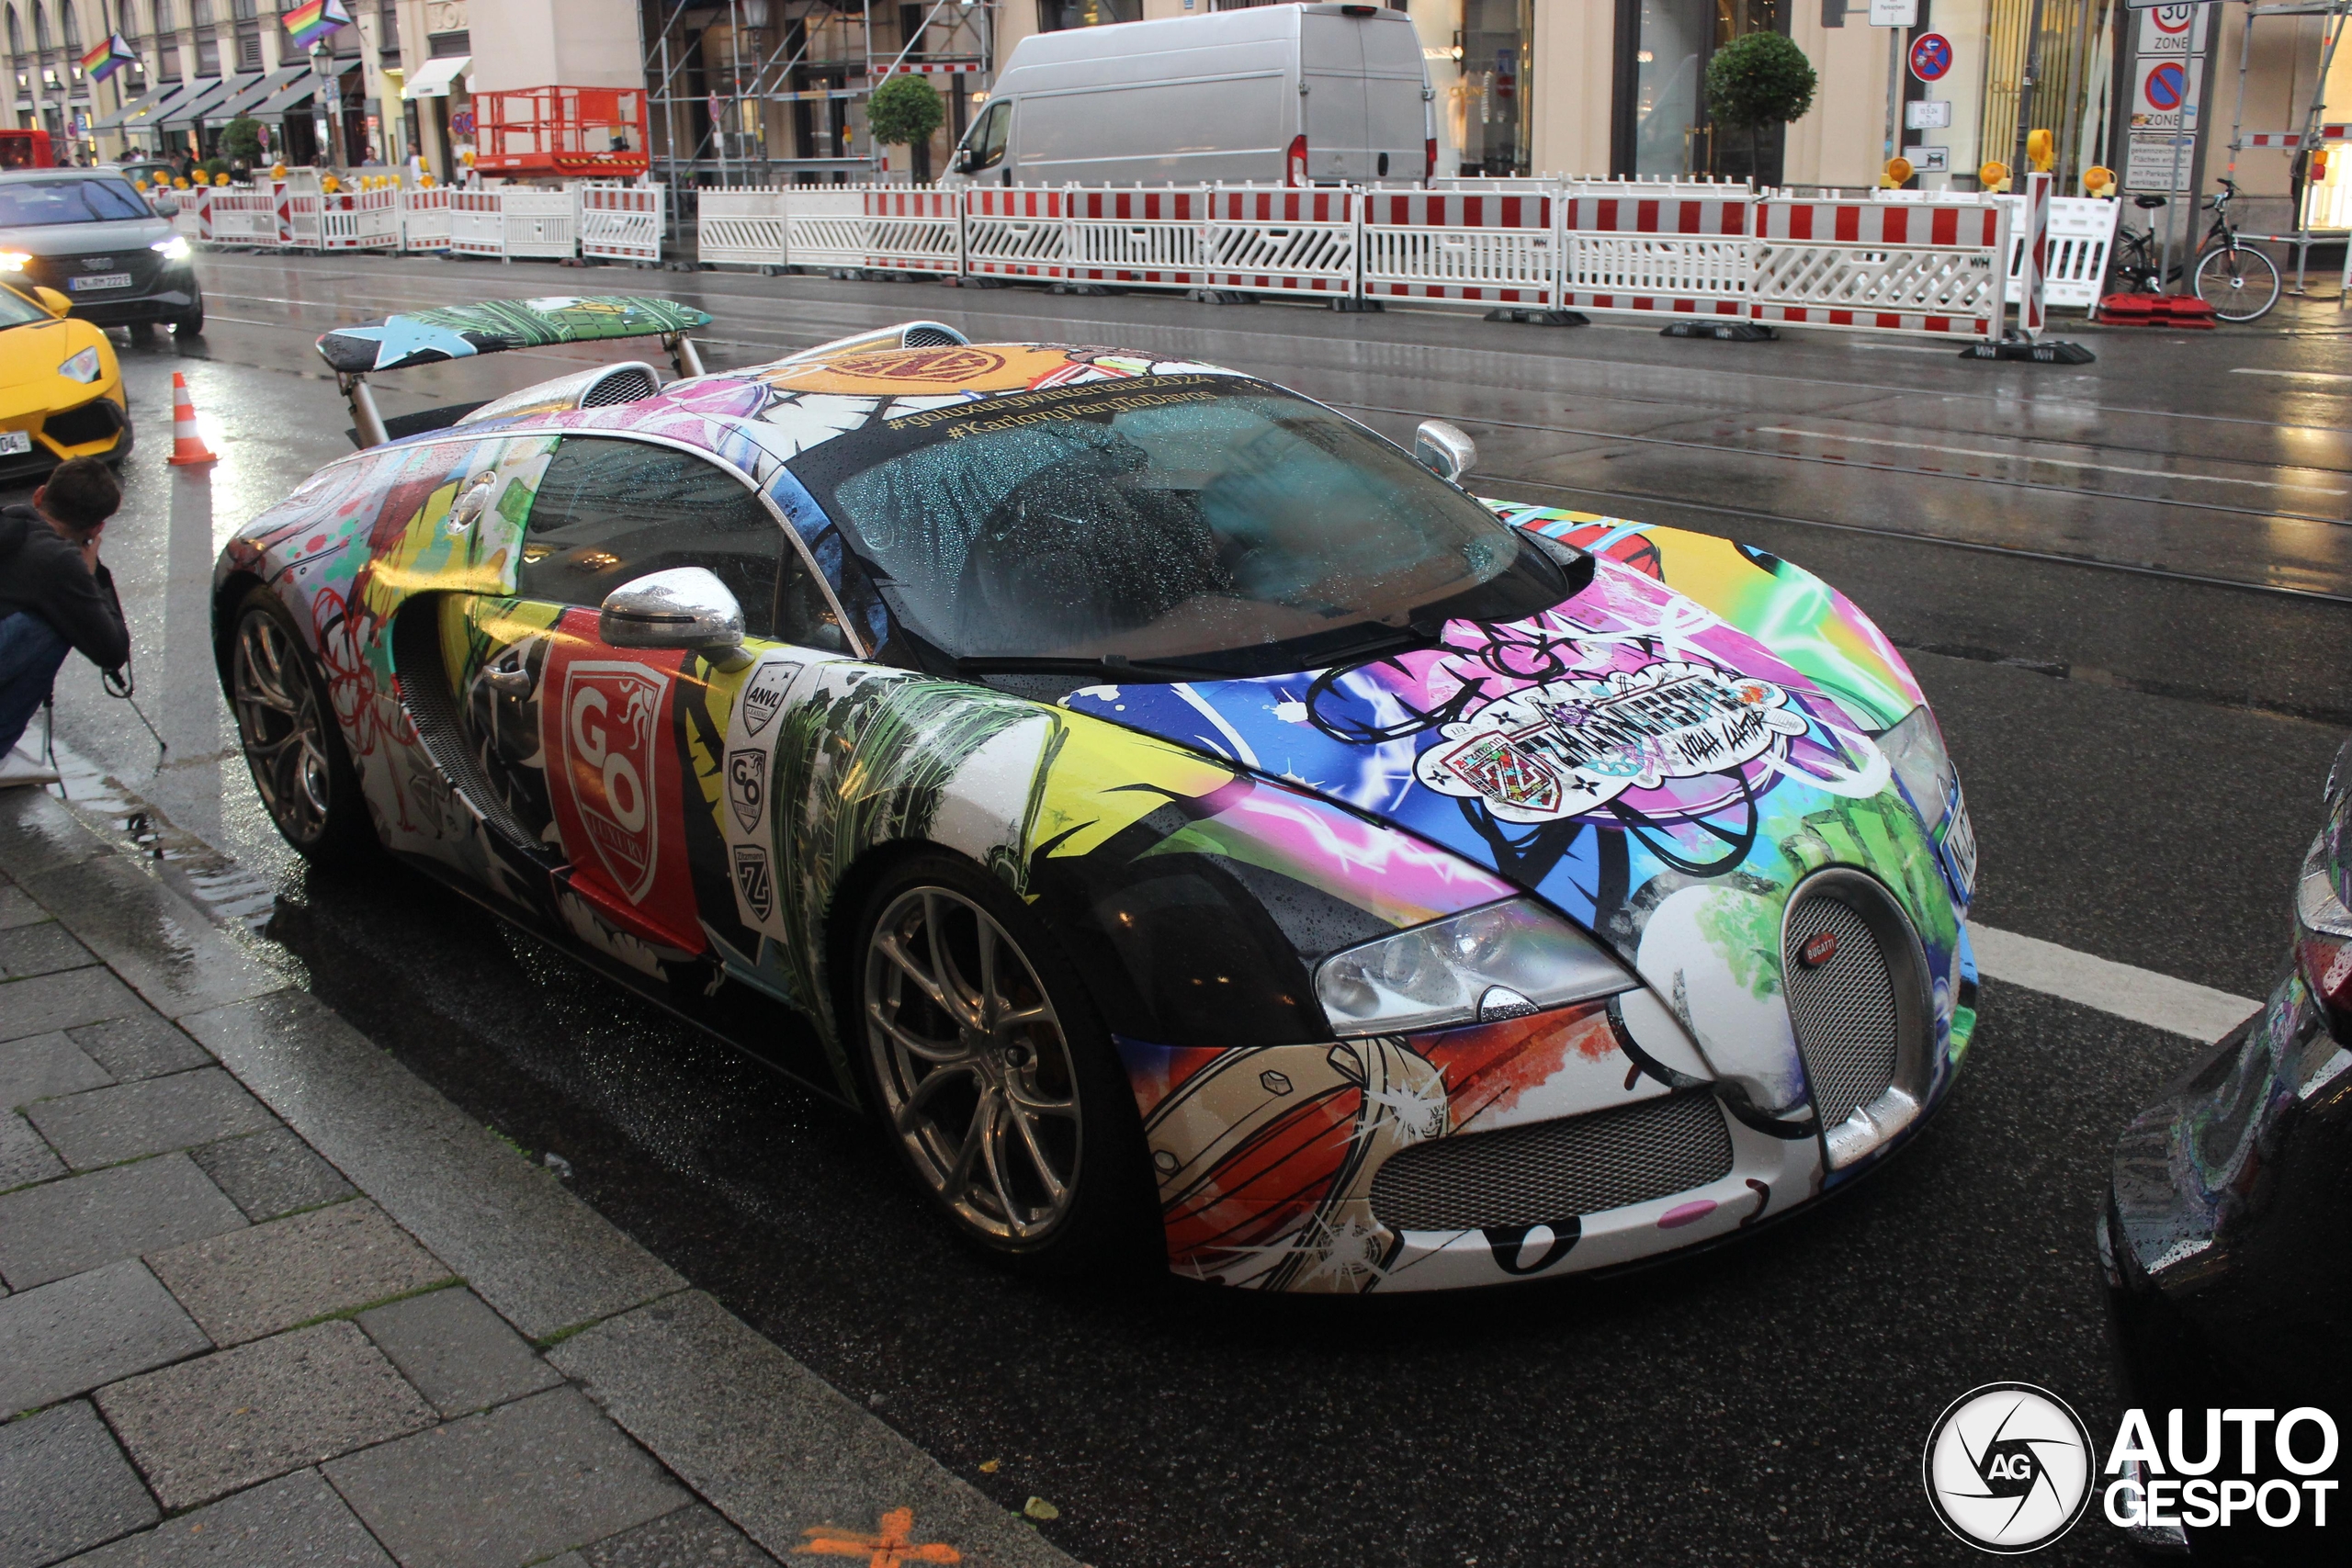 No respect shown for this Veyron